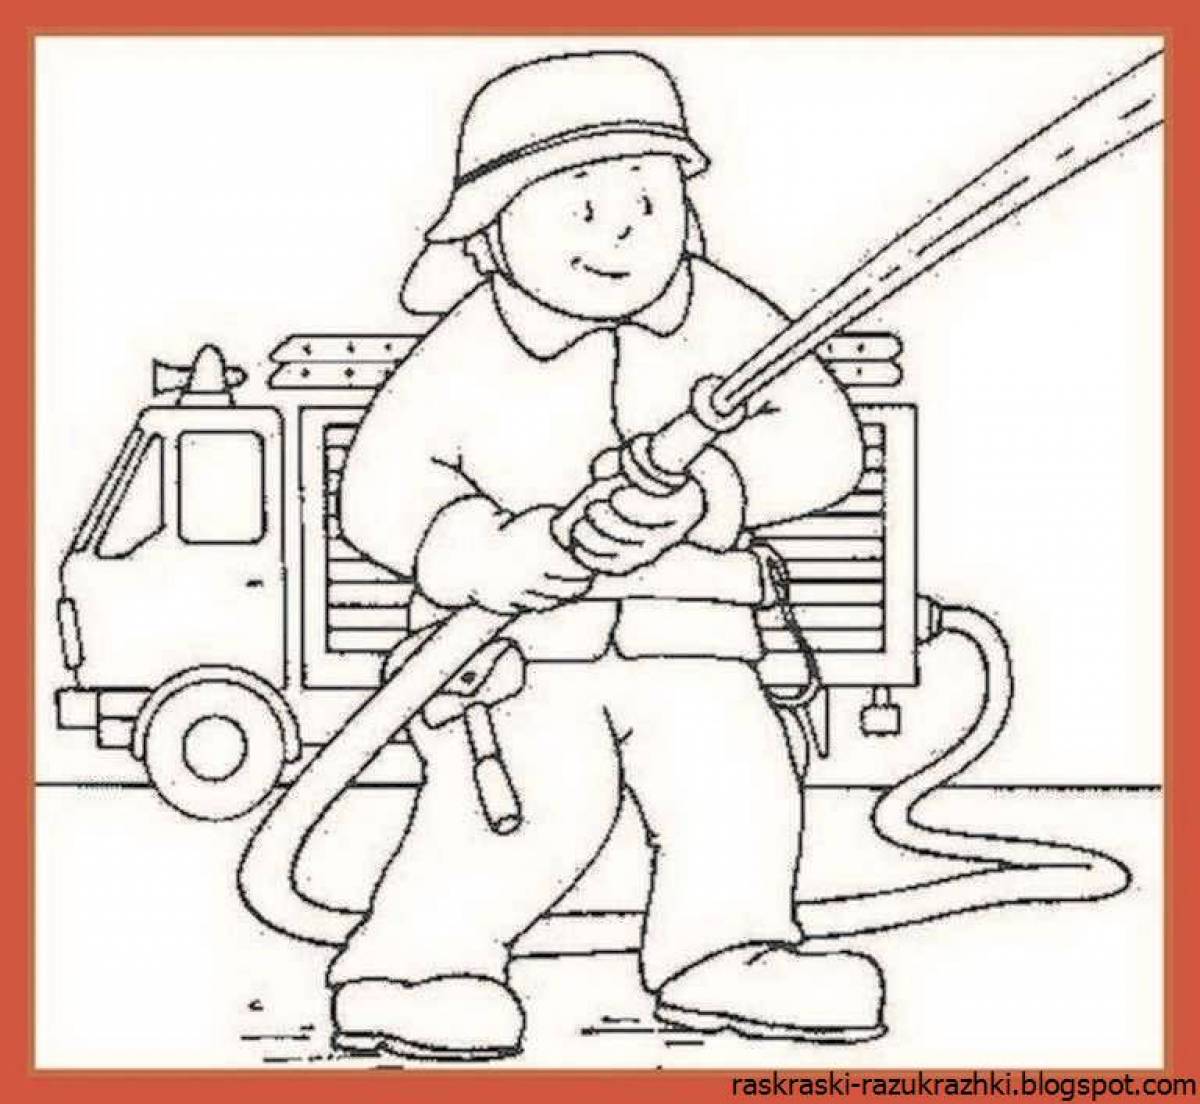 Weird fireman coloring pages for kids